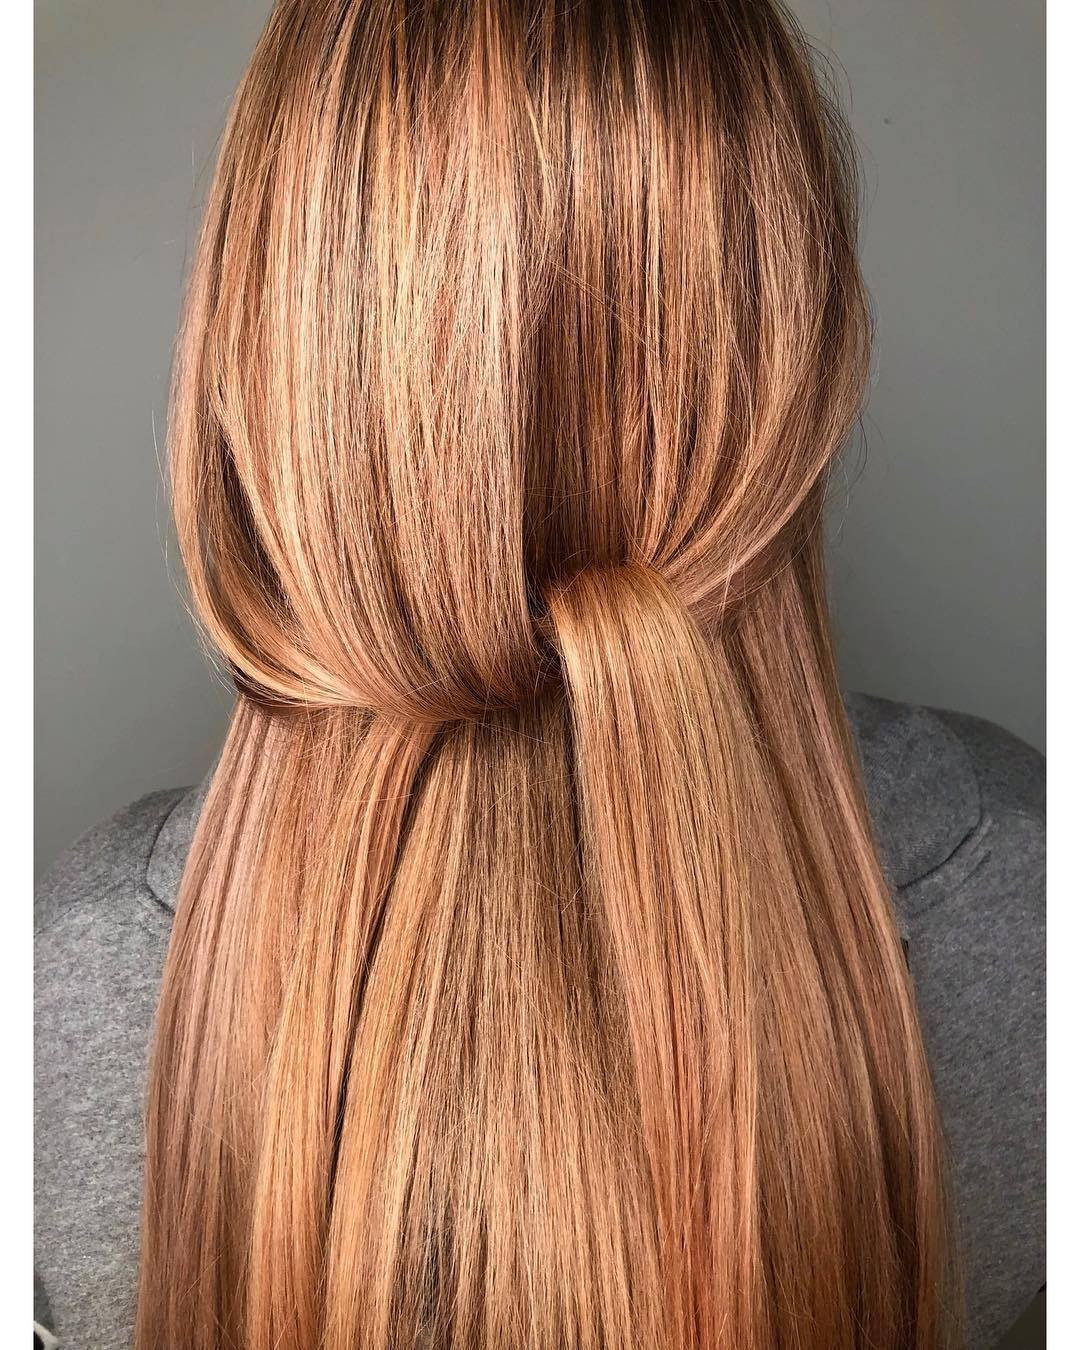 Schwarzkopf Professional - Warming things up with this rich rose gold colour 💫

*Formula* 👉 @oliviaasworldd lifted with #BLONDME Bond Enforcing Premium Lightener 9+ before toning with 7-57 & 9-57.

#i...